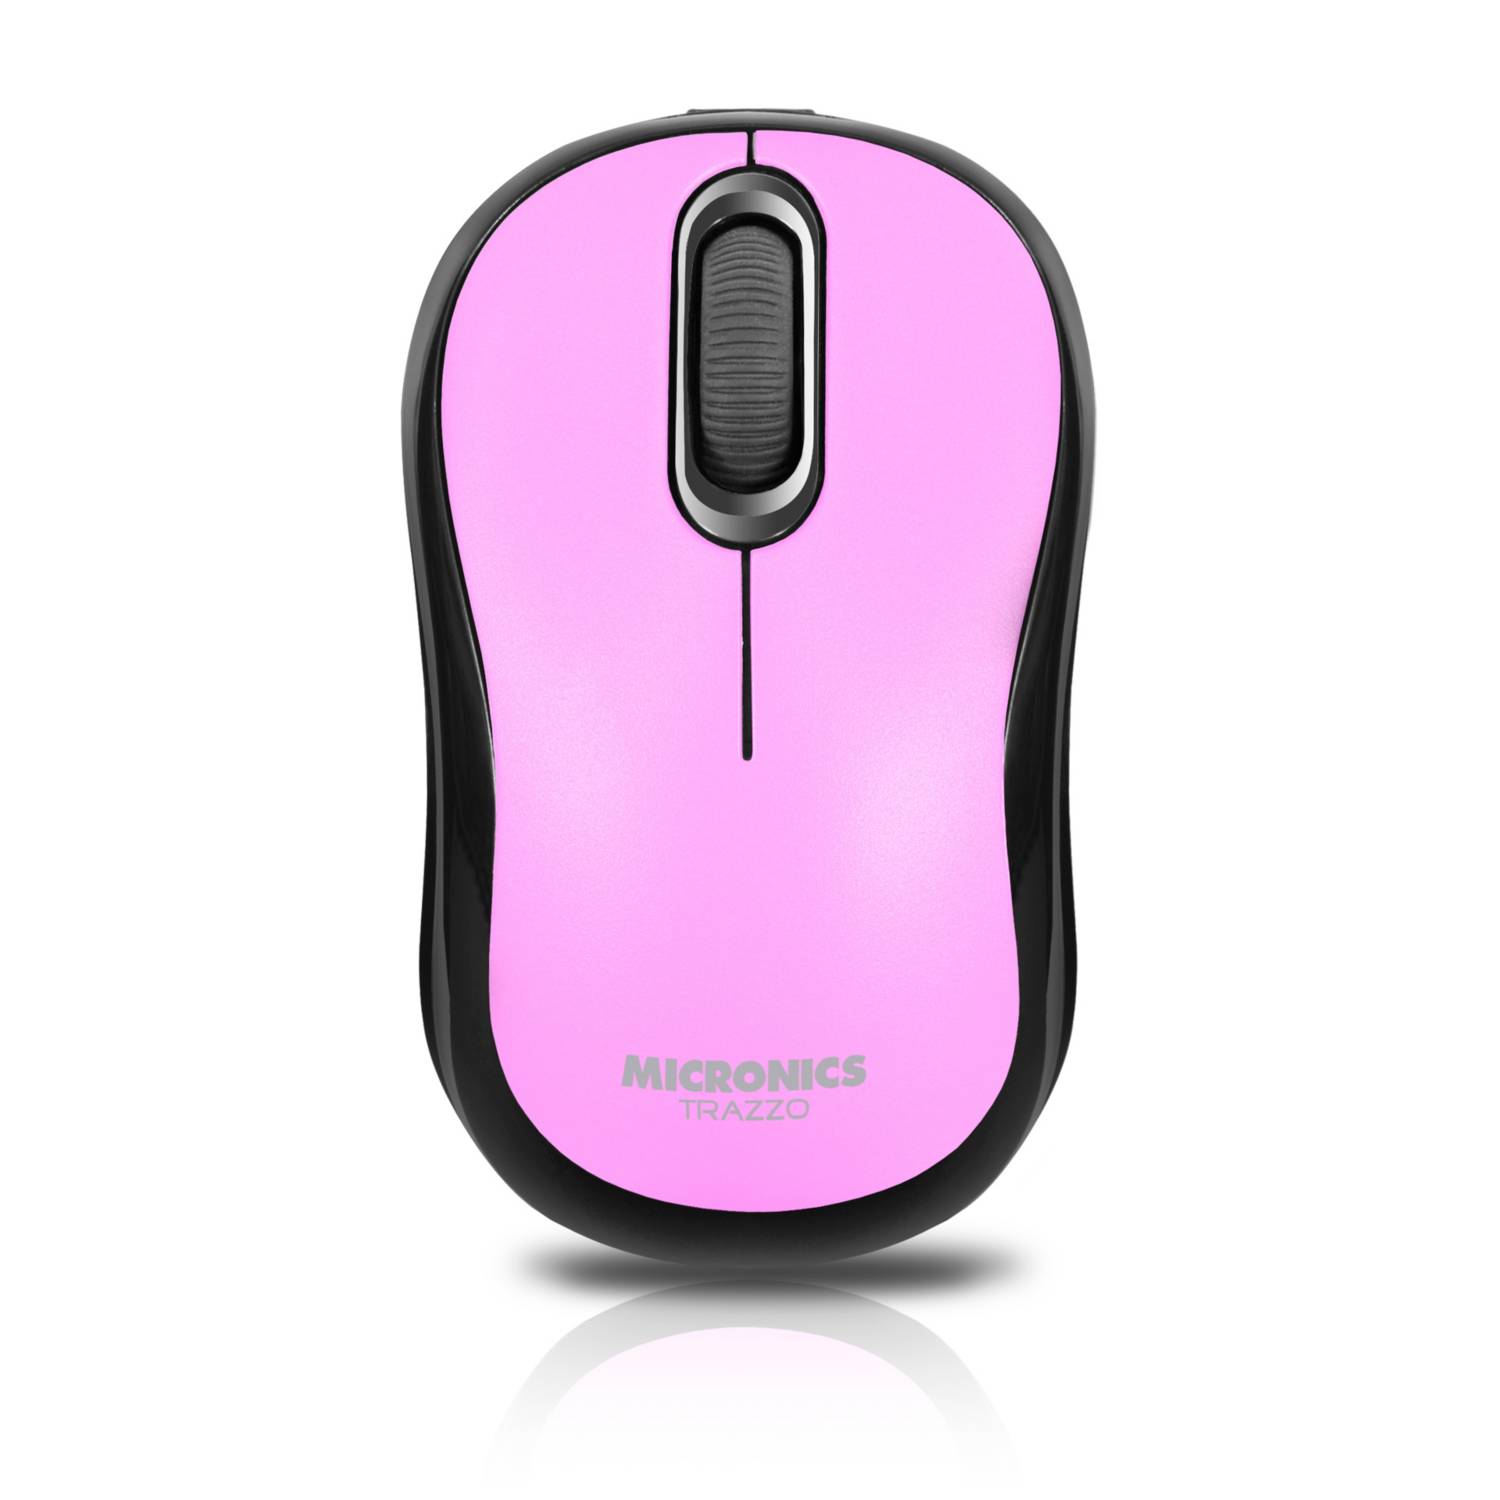 Mouse Inalámbrico Micronics Trazzo MR700r PINK